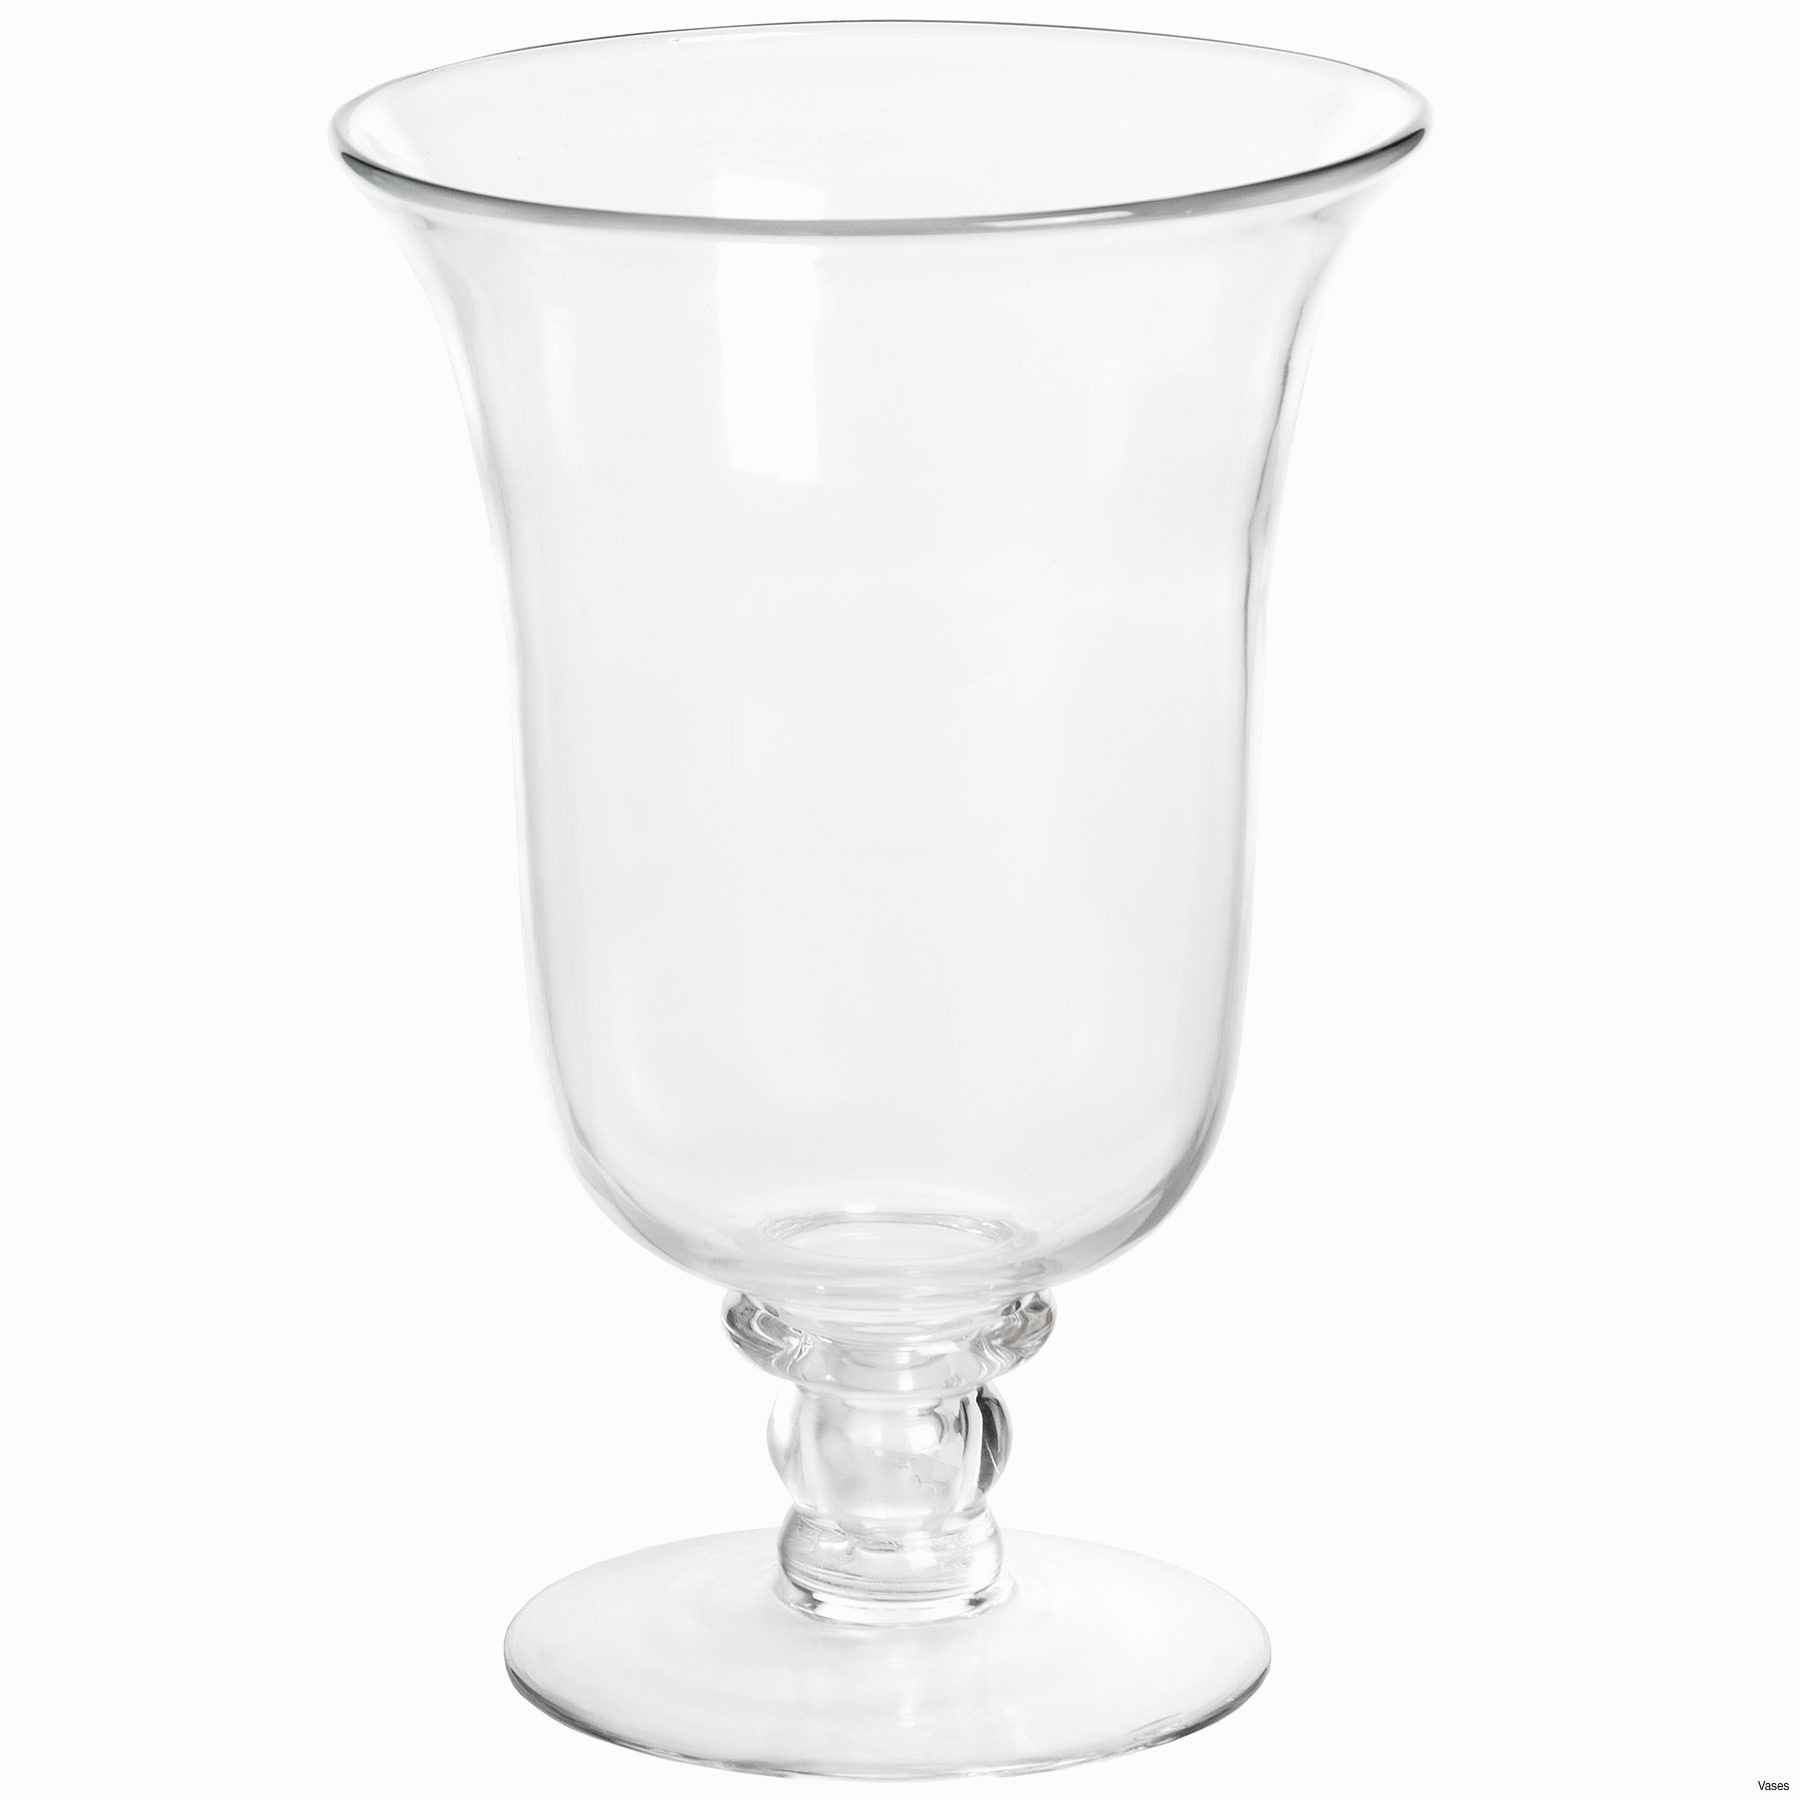 22 Ideal Glass Vase with Lid 2024 free download glass vase with lid of candle stands wholesale lovely faux crystal candle holders alive within candle stands wholesale lovely faux crystal candle holders alive vases gold tall jpgi 0d cheap 